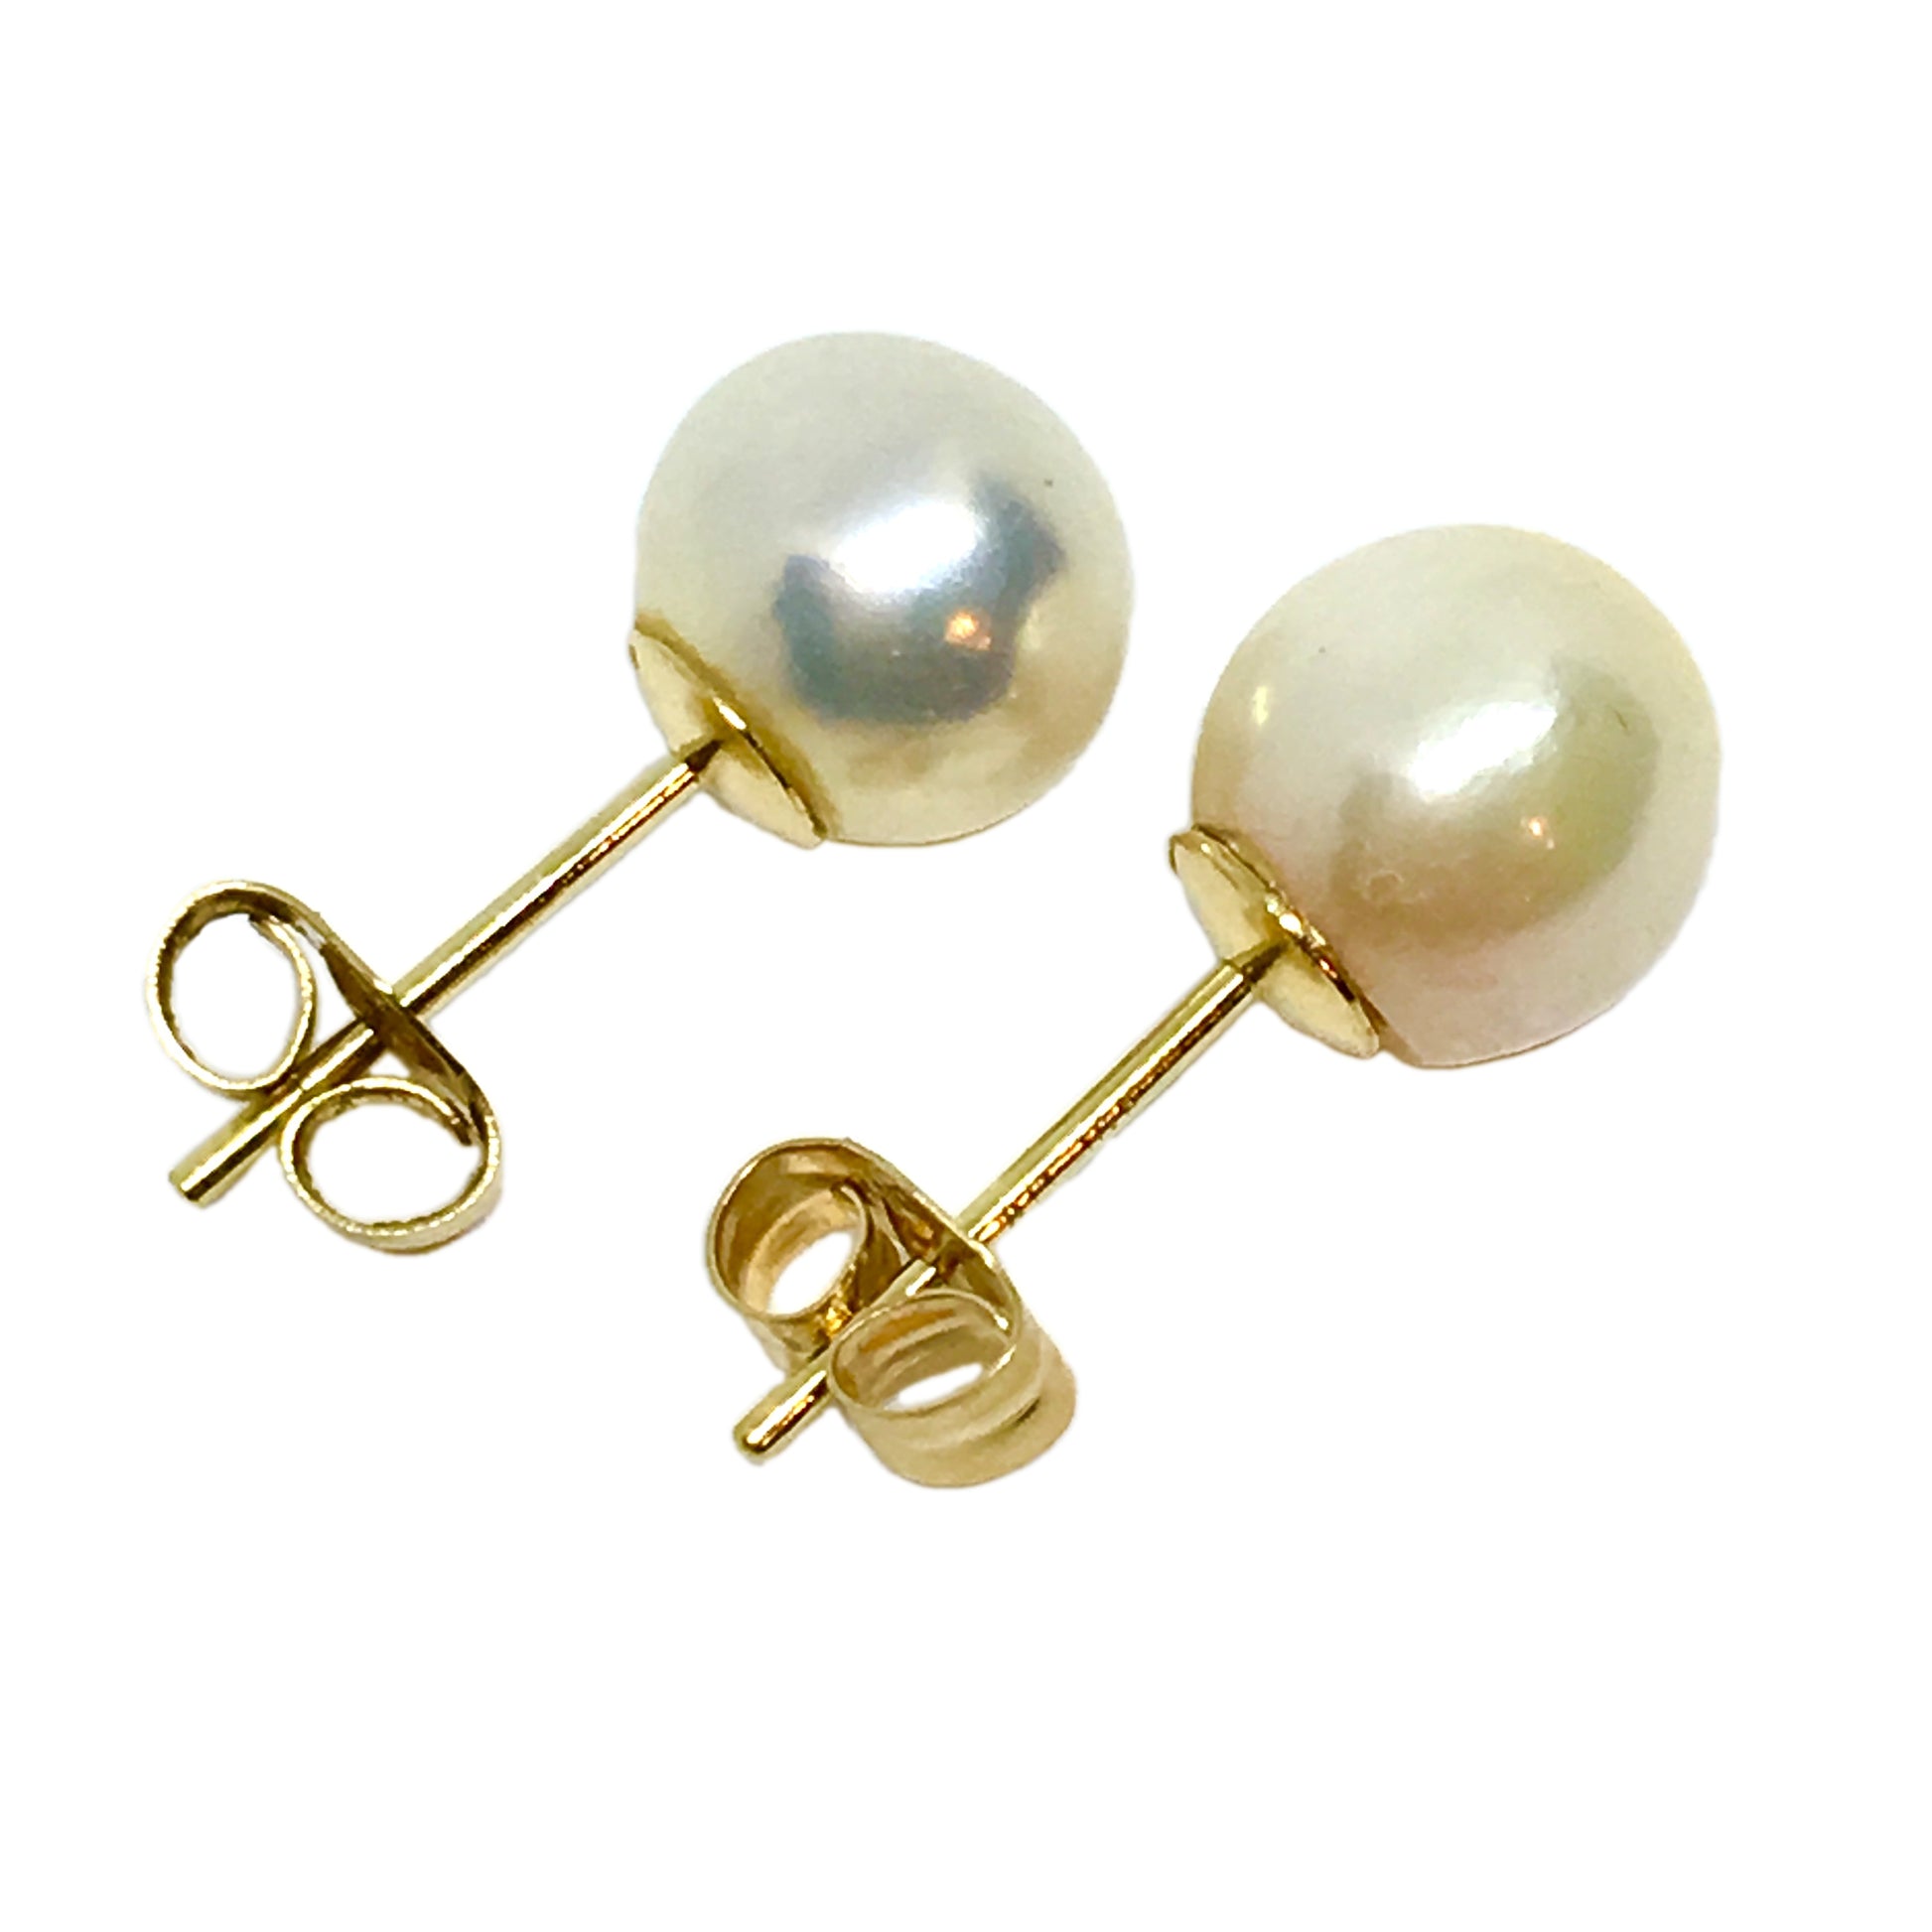 Vintage 14k Gold 7 mm Traditional Cultured White Pearl Stud Earrings